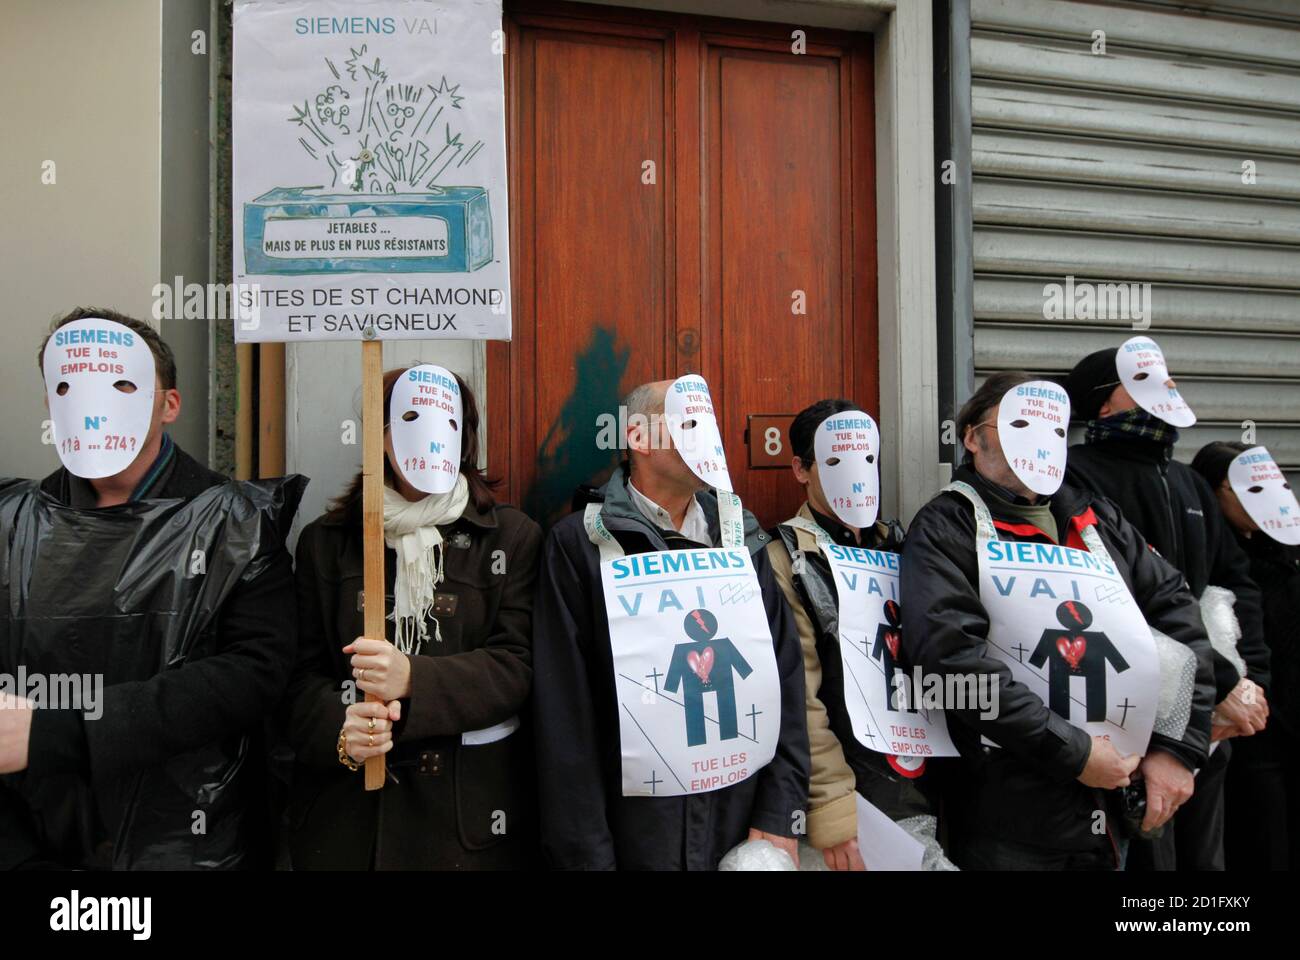 Employees of industrial conglomerate Siemens wear masks as they demonstrate to protest the closing of their factory in Saint-Chamond, south eastern France, February 4, 2010. The slogan reads 'Siemens kill jobs'.  REUTERS/Robert Pratta  (FRANCE - Tags: EMPLOYMENT BUSINESS) Stock Photo